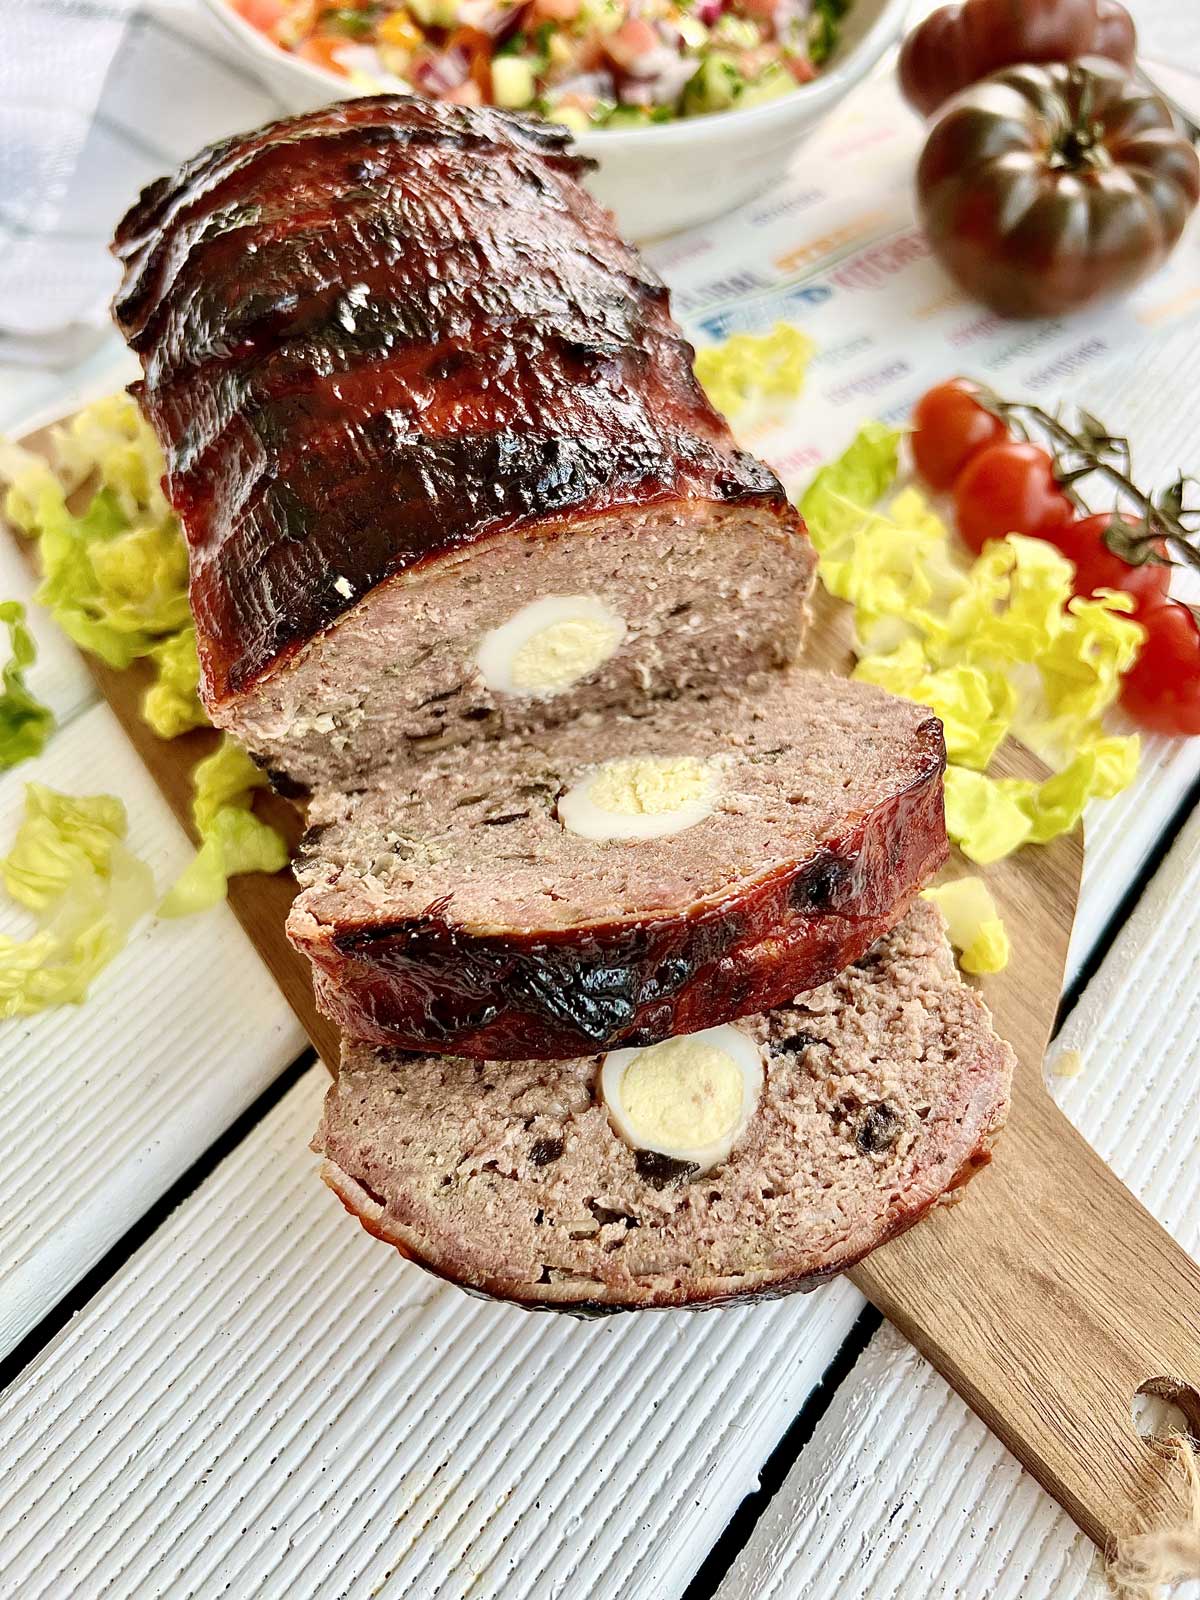 Smoked meatloaf on a wooden chopping board with salad and tomatoes around it.